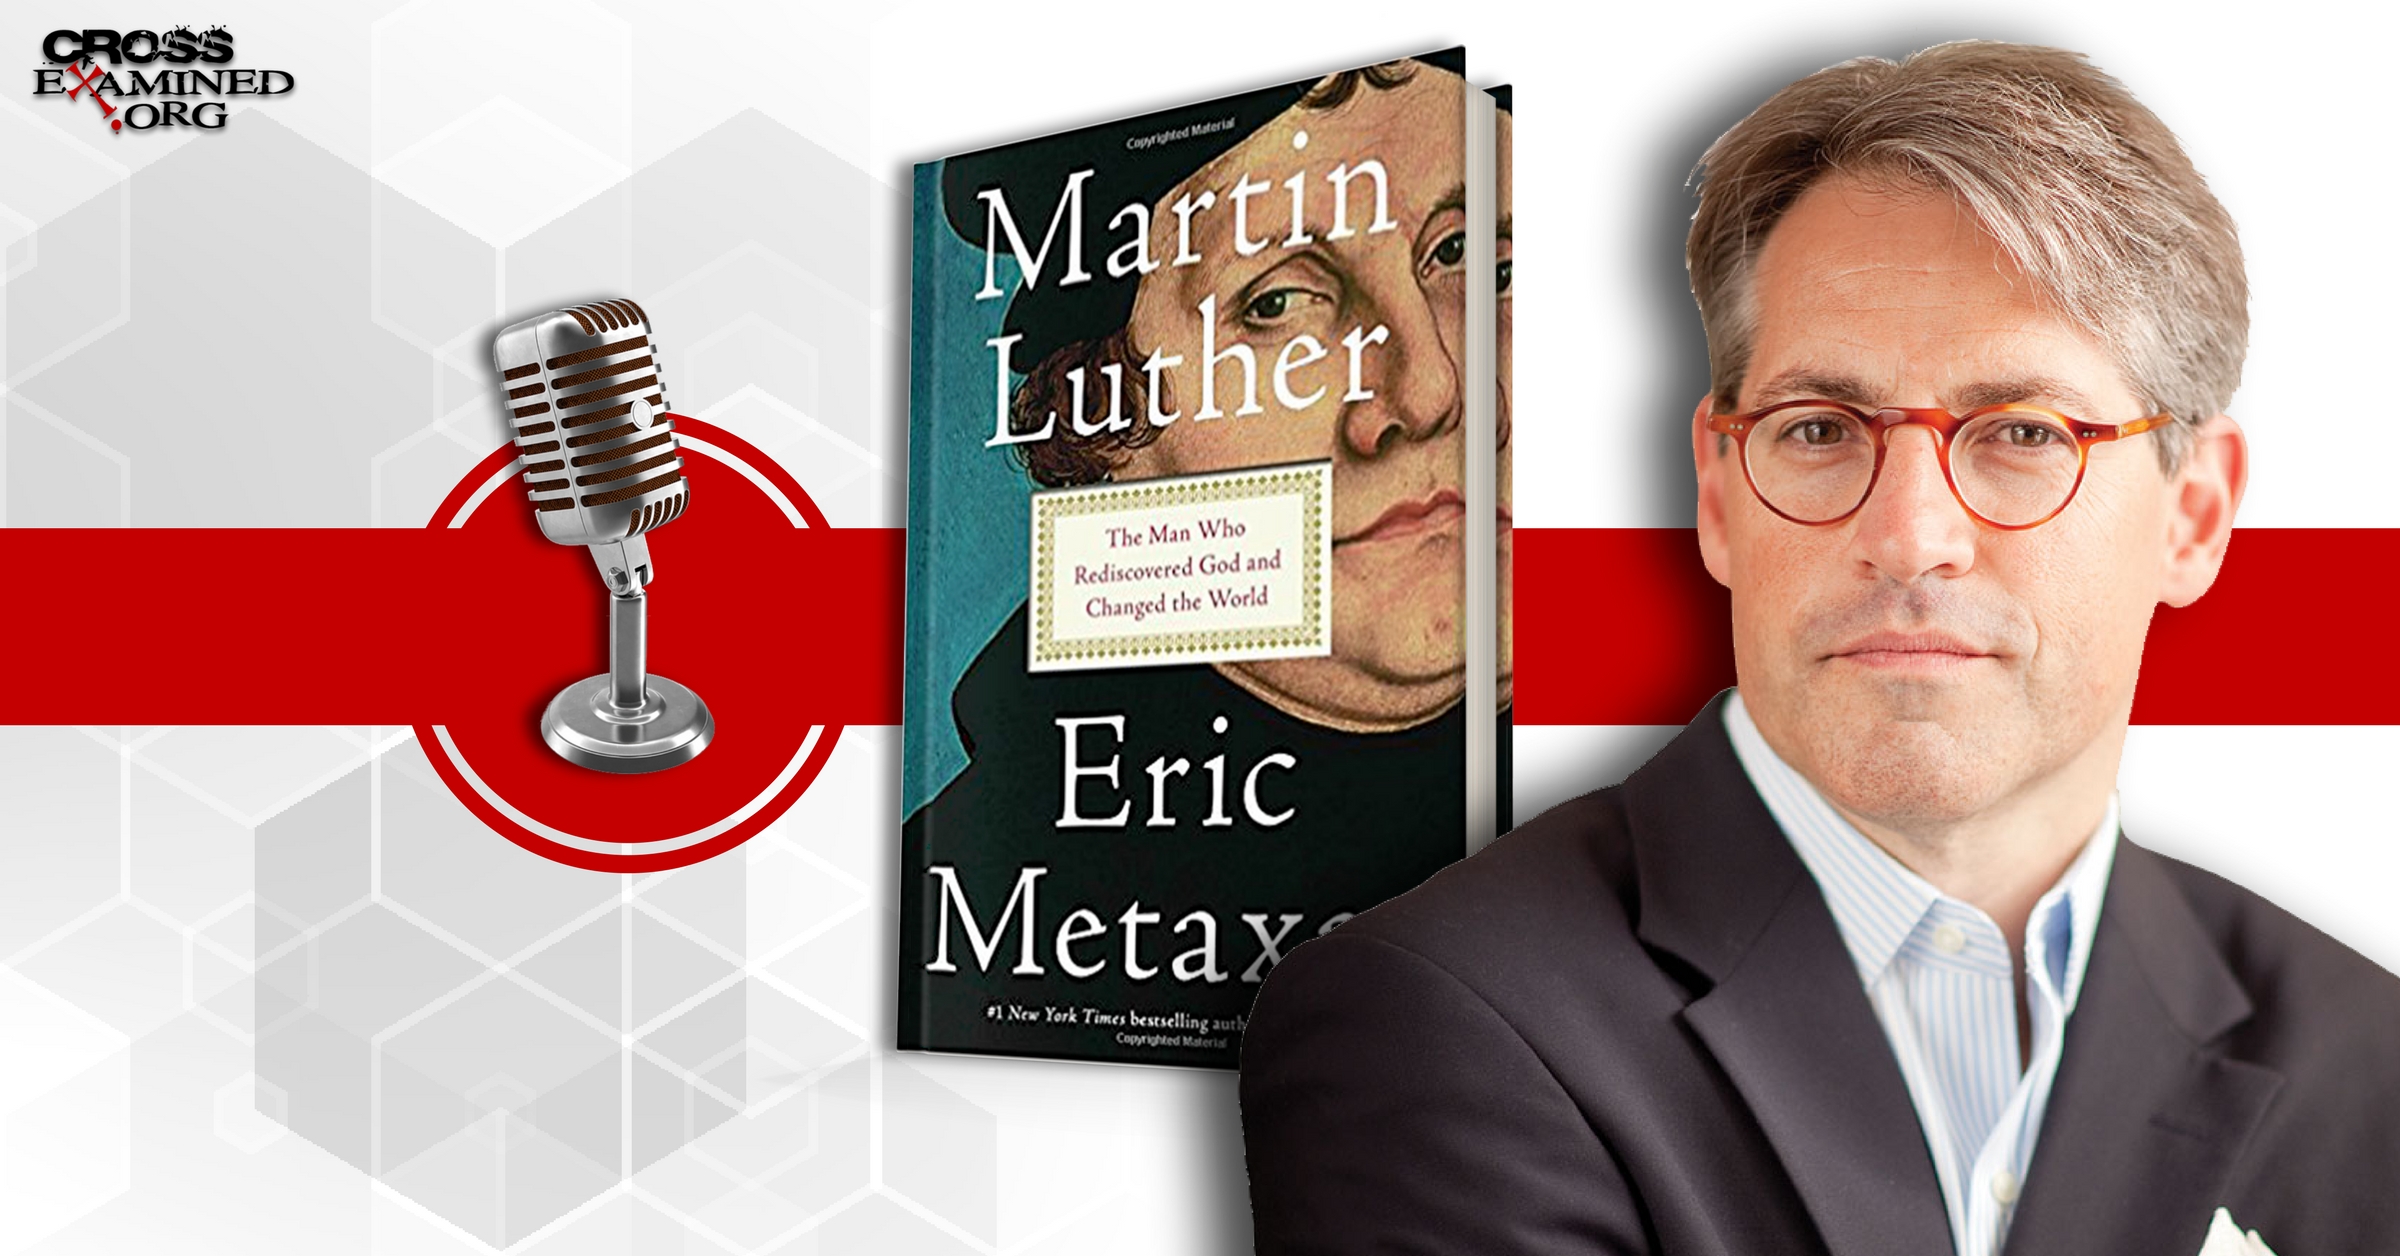 Martin Luther: The Man Who Rediscovered God and Changed the World with Eric Metaxas